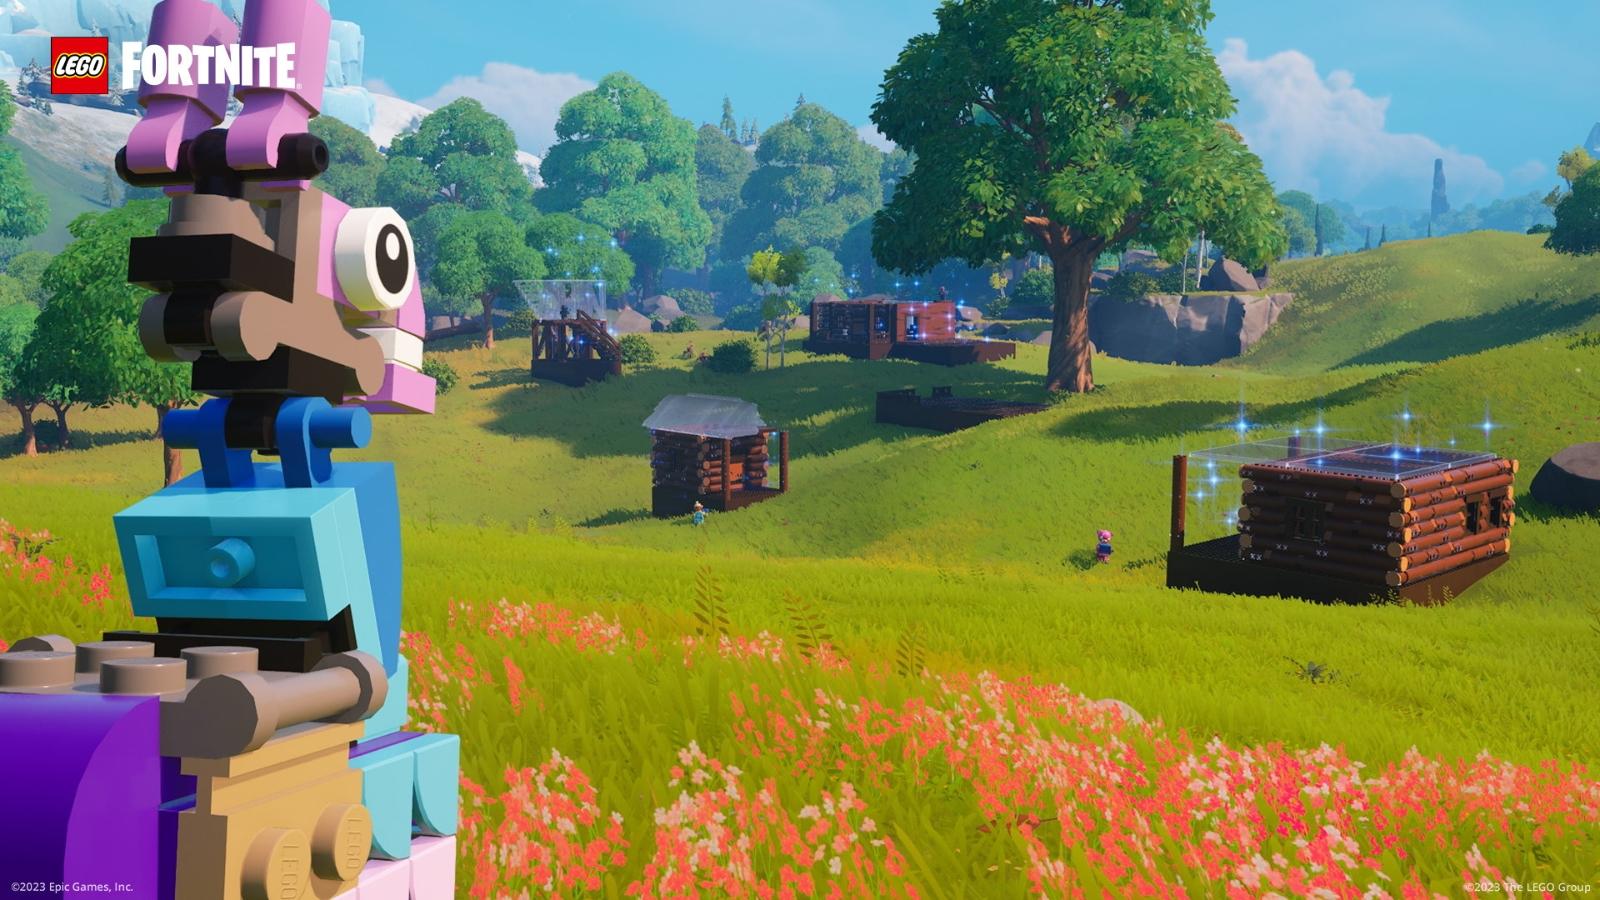 The LEGO Group and Epic Games Team Up to Build a Place for Kids to